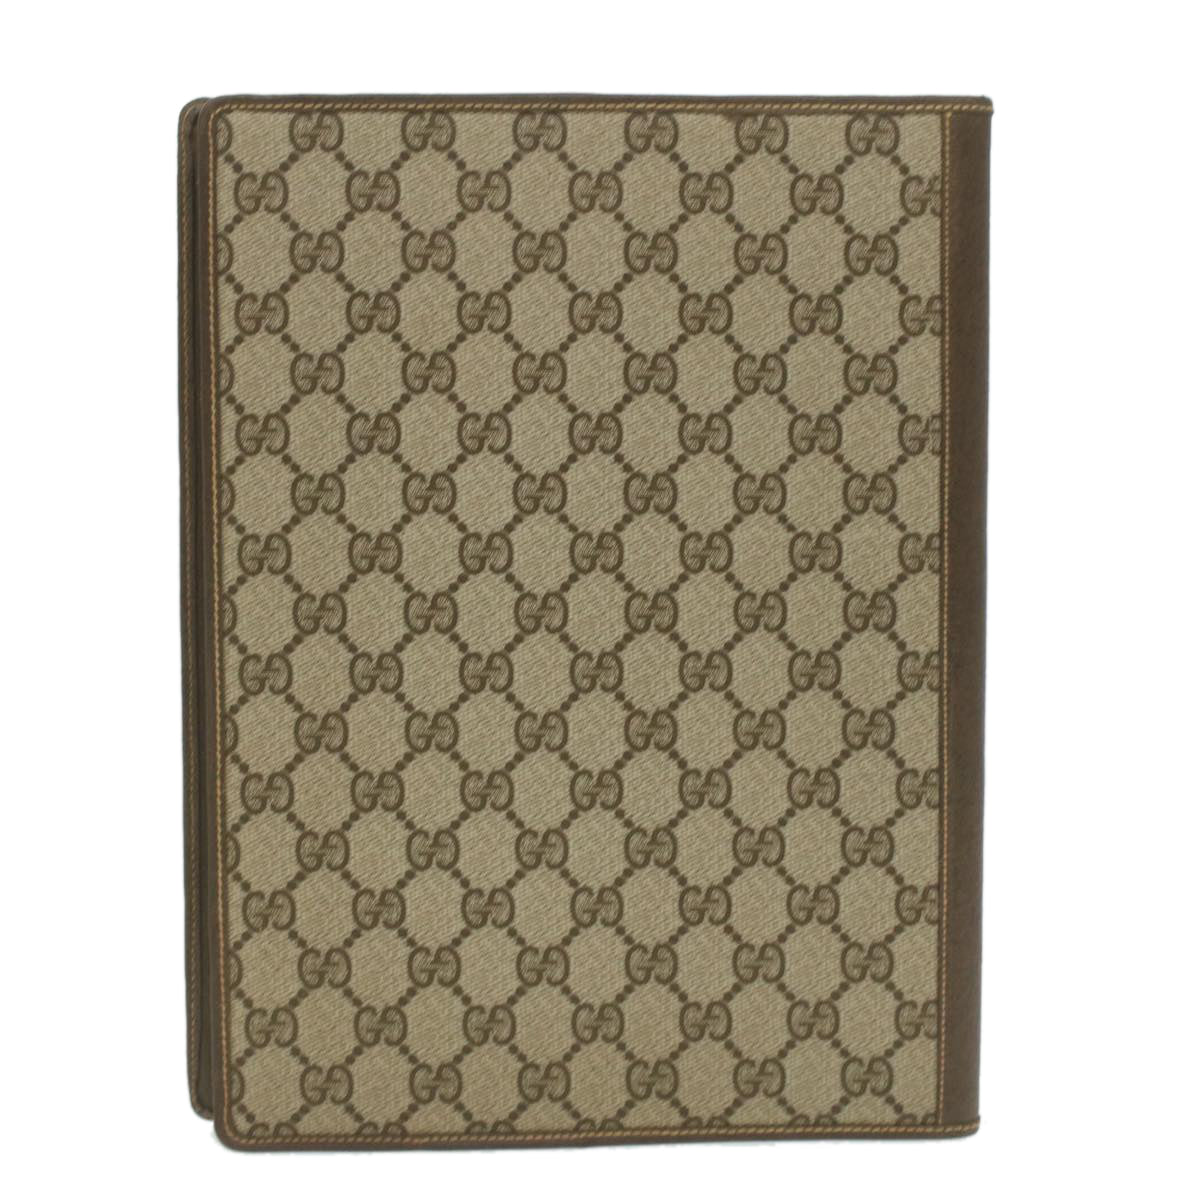 GUCCI GG Canvas Day Planner Cover PVC Leather Beige Auth am3940 - 0